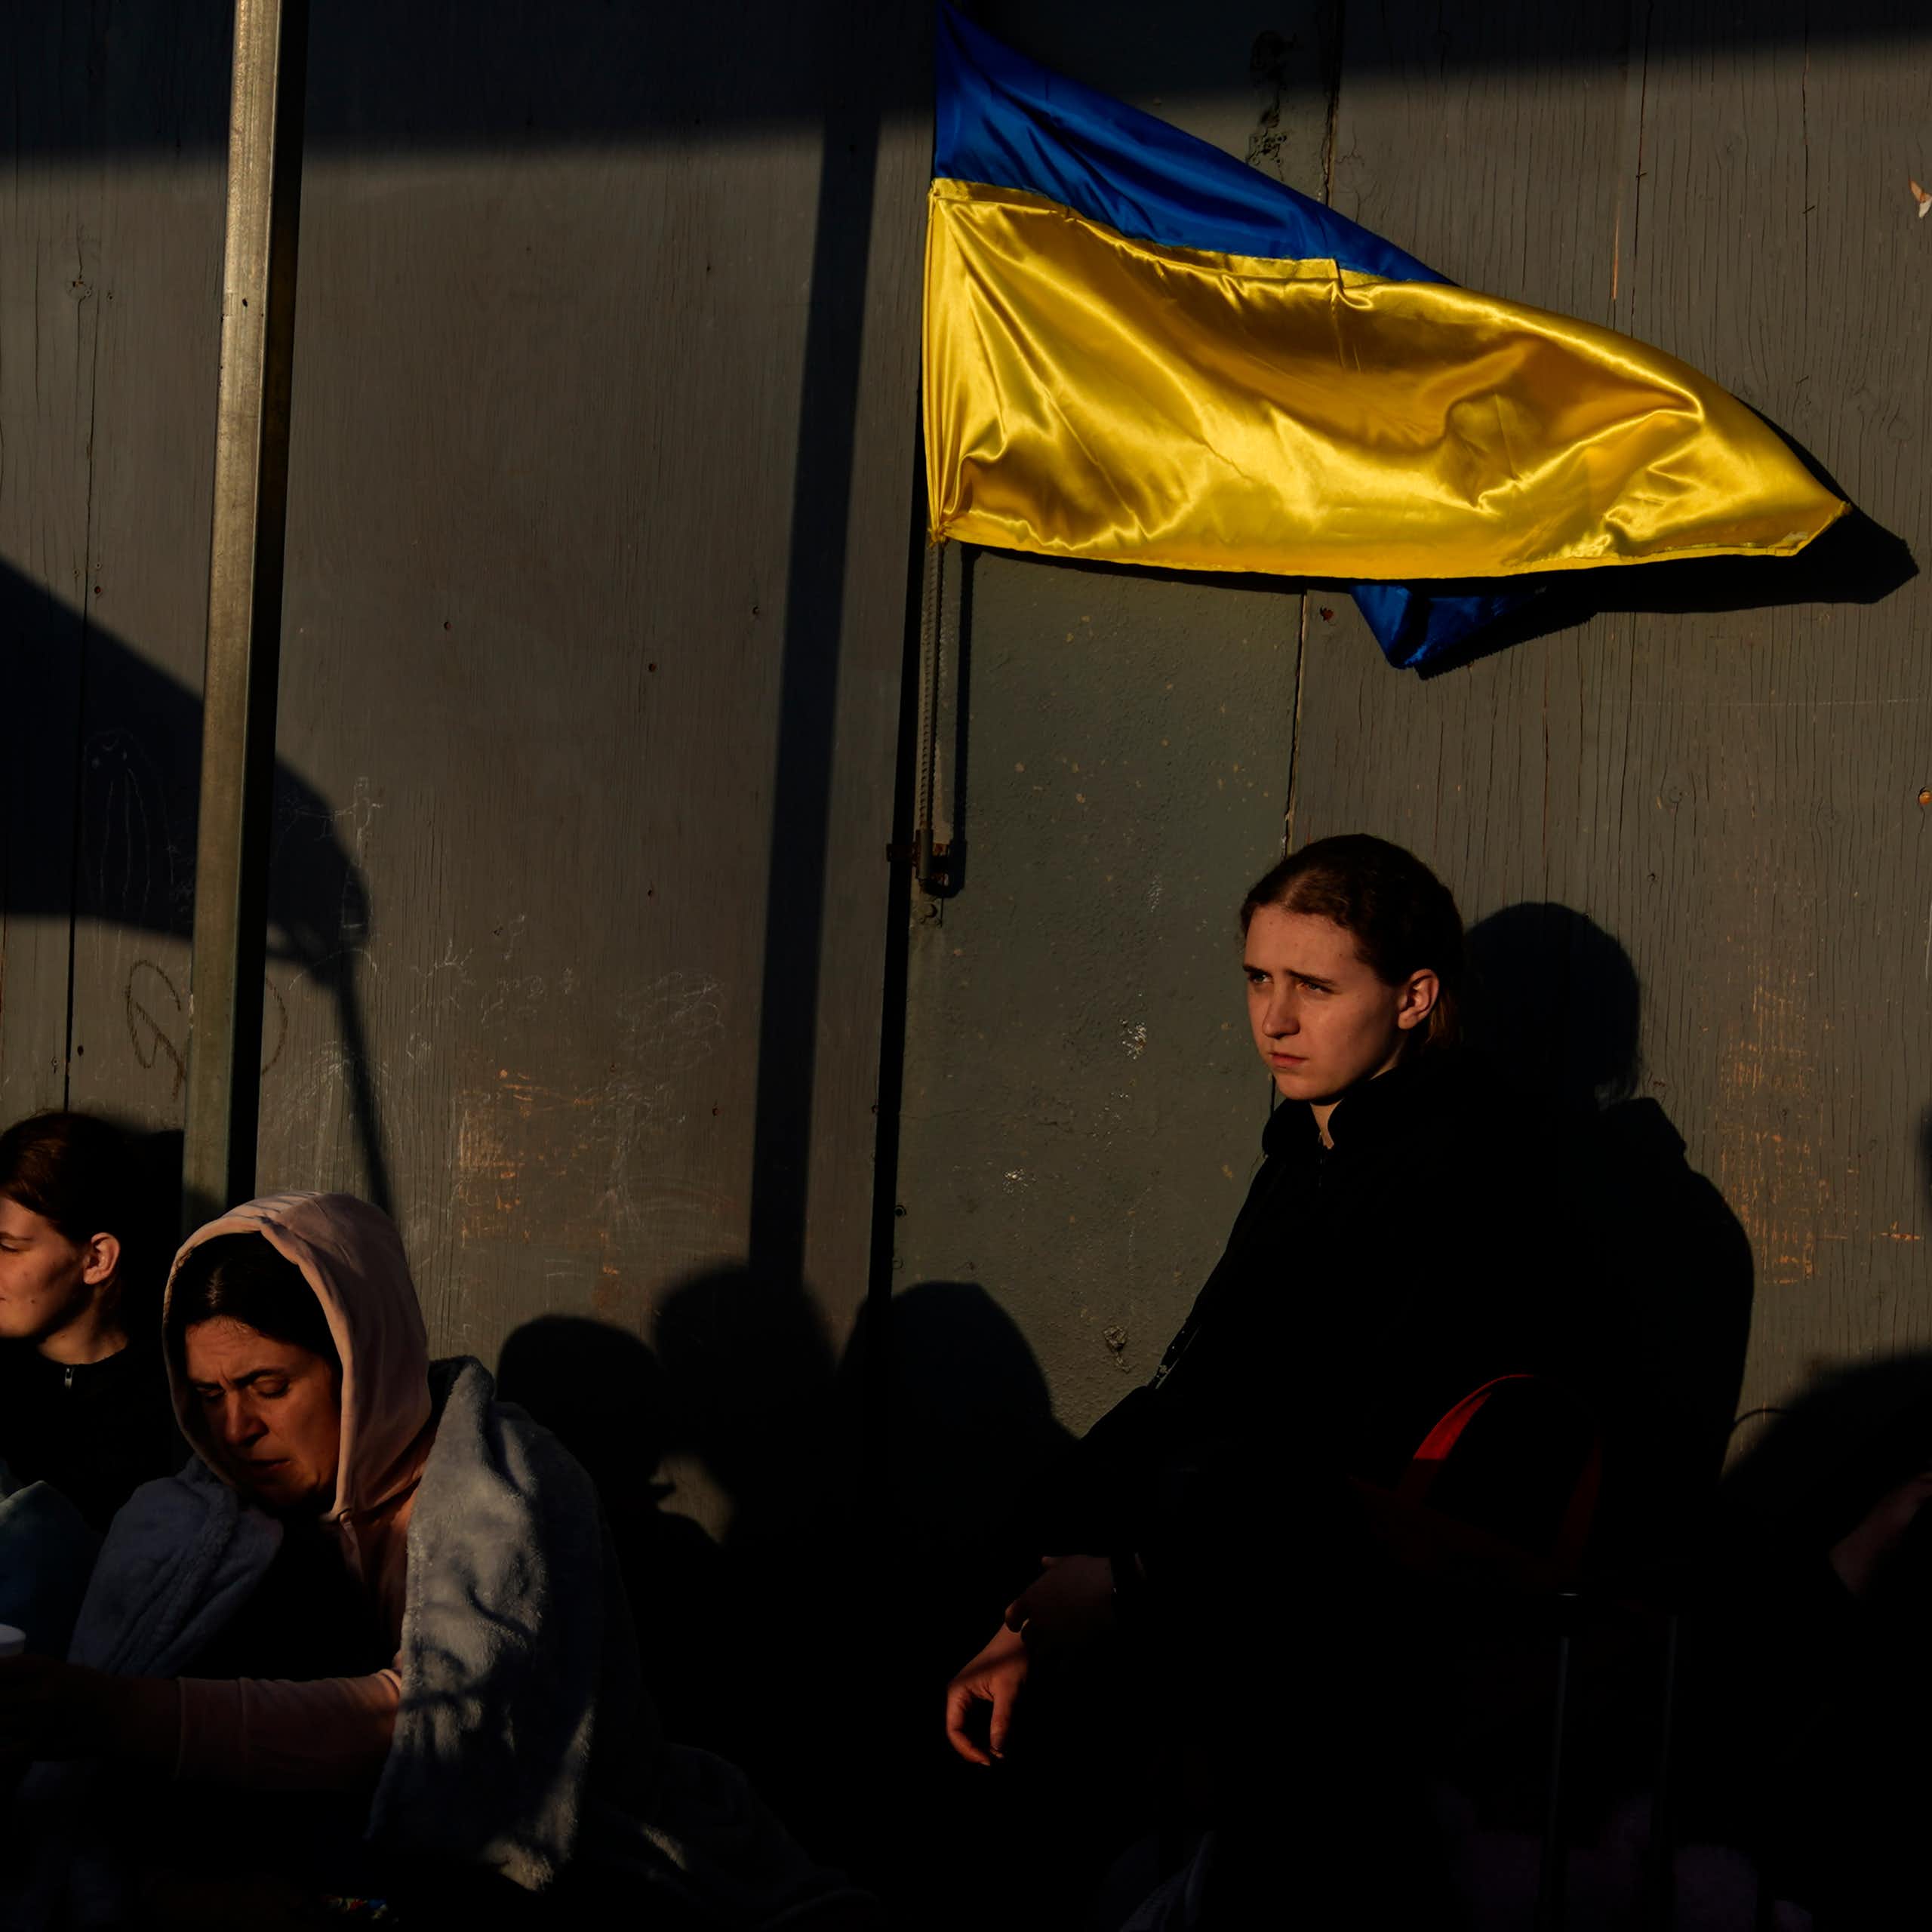 Men and women huddled together near the U.S. border near a yellow and blue Ukrainian flag.